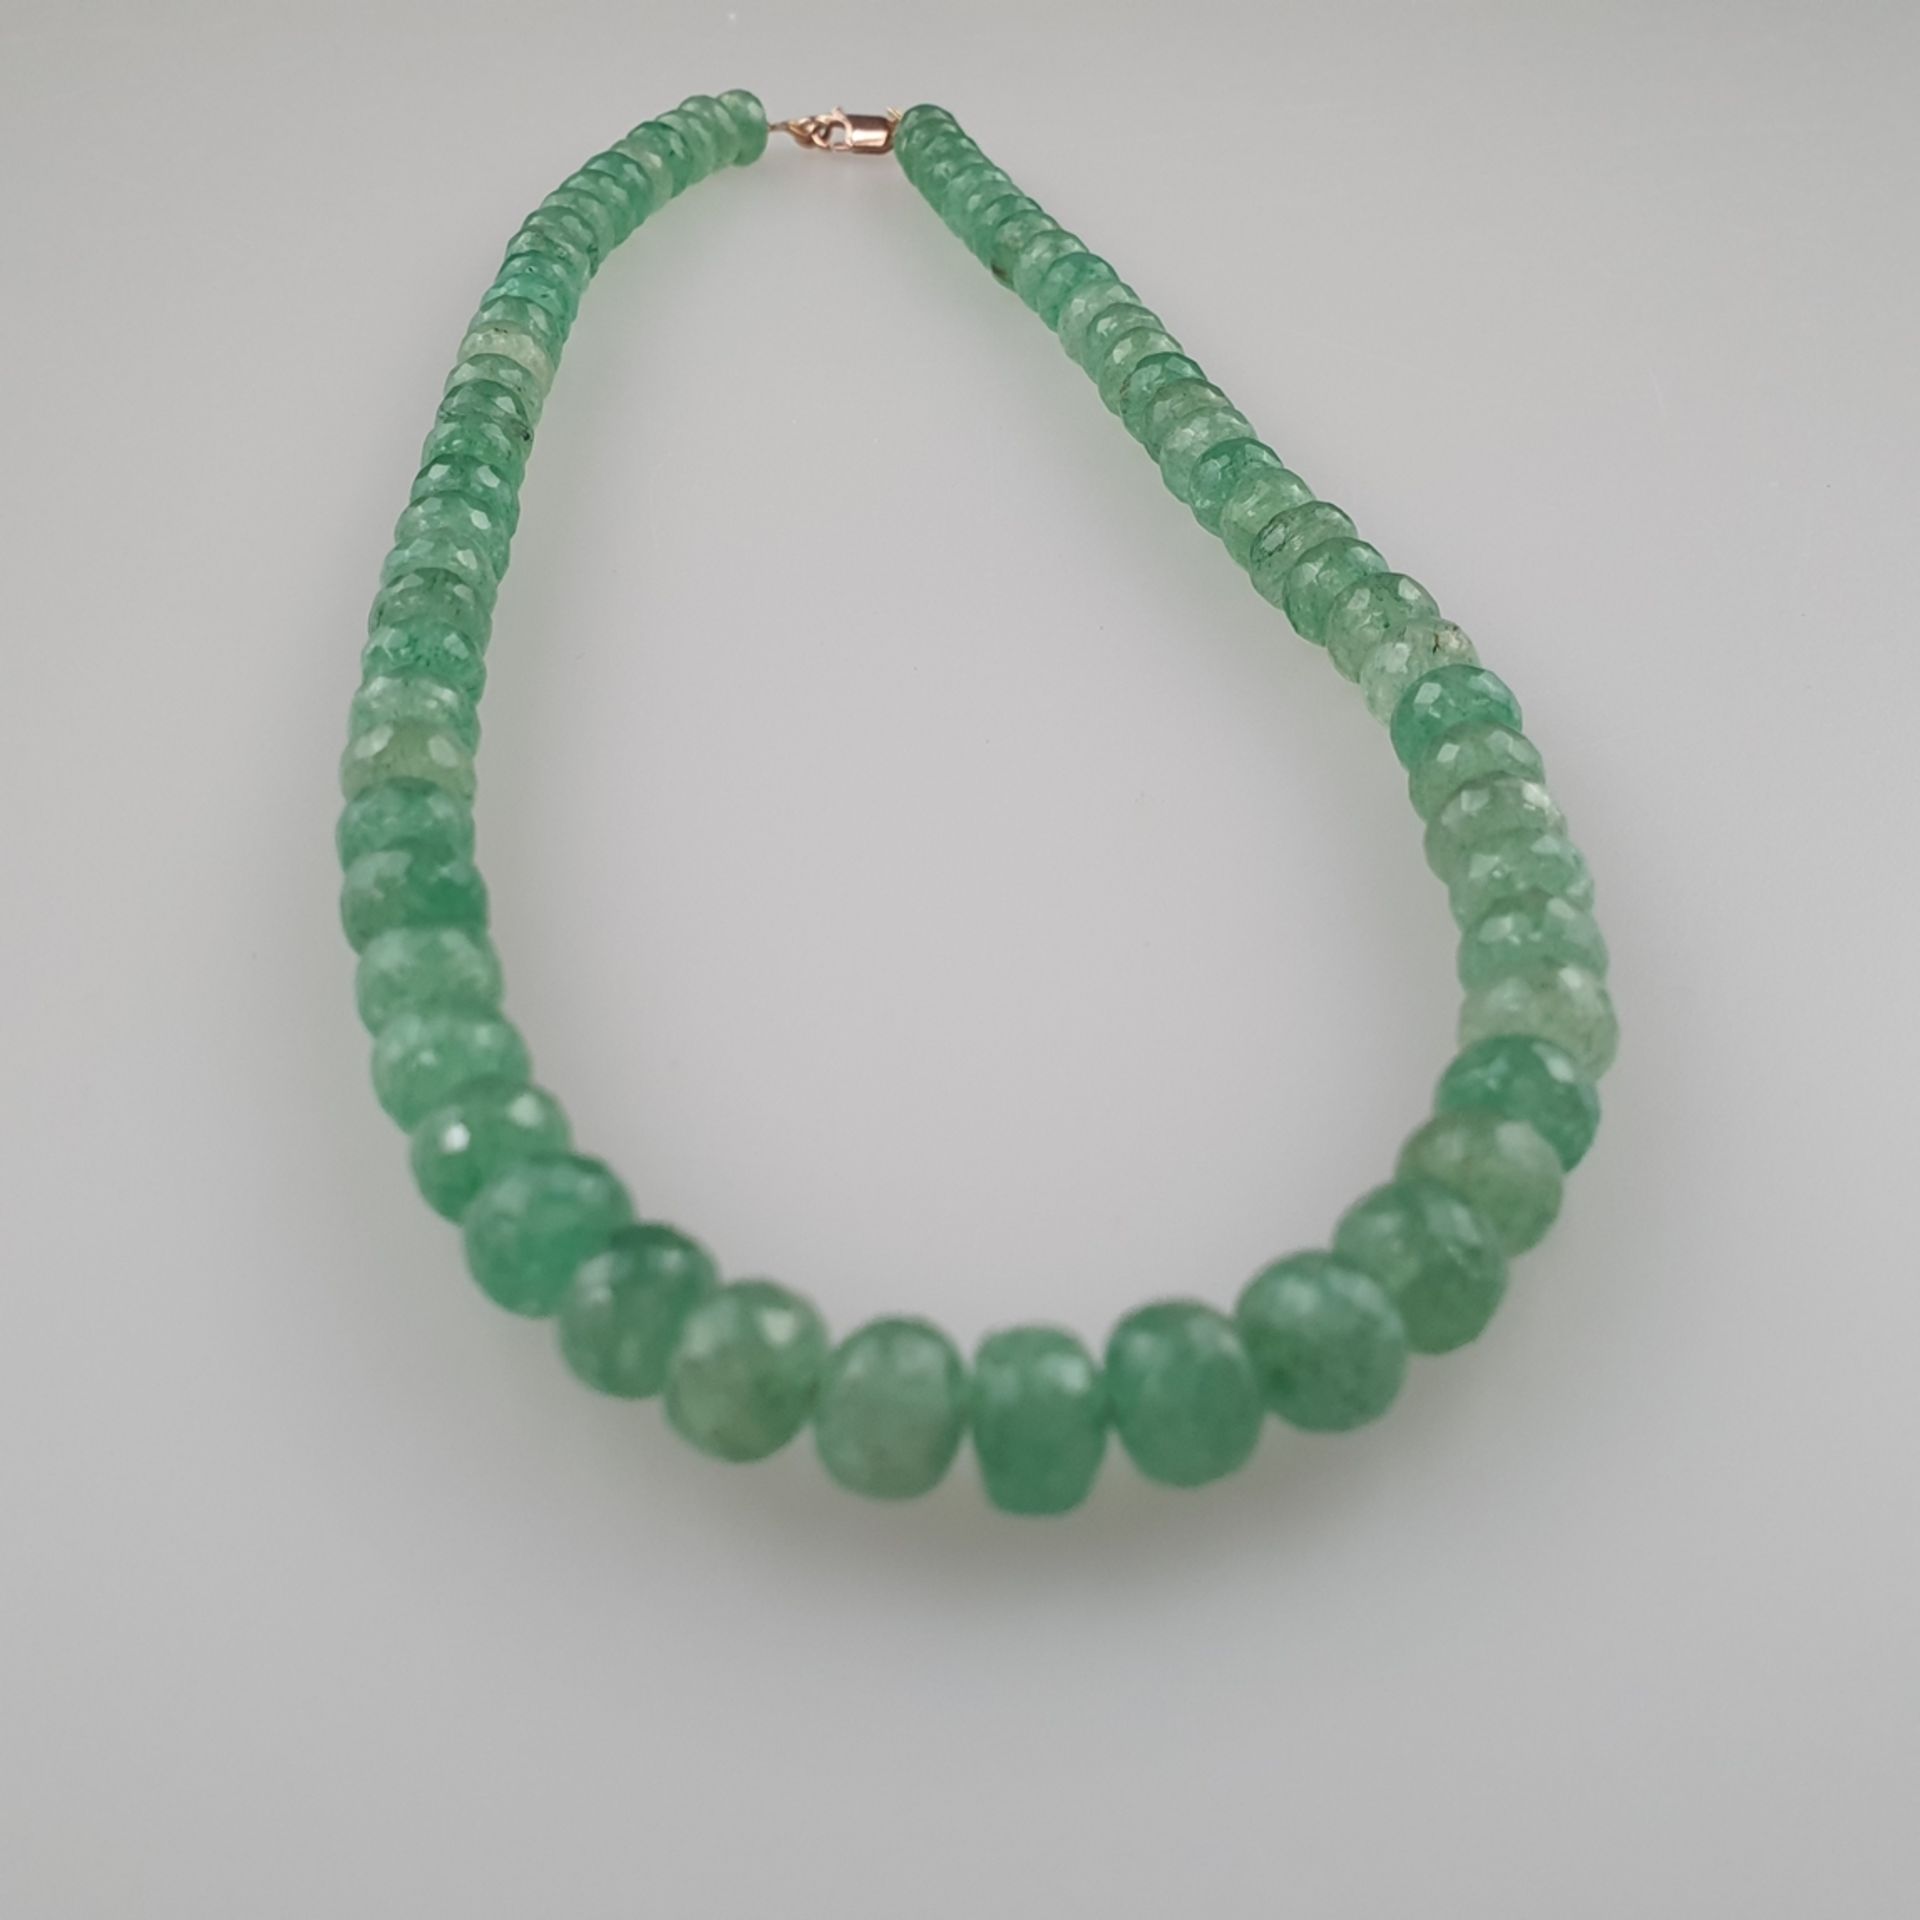 258cts Faceted Beryl Emerald Beads Necklace, L. ca. 45 cm,  ca. 50 Gramm - Image 6 of 6